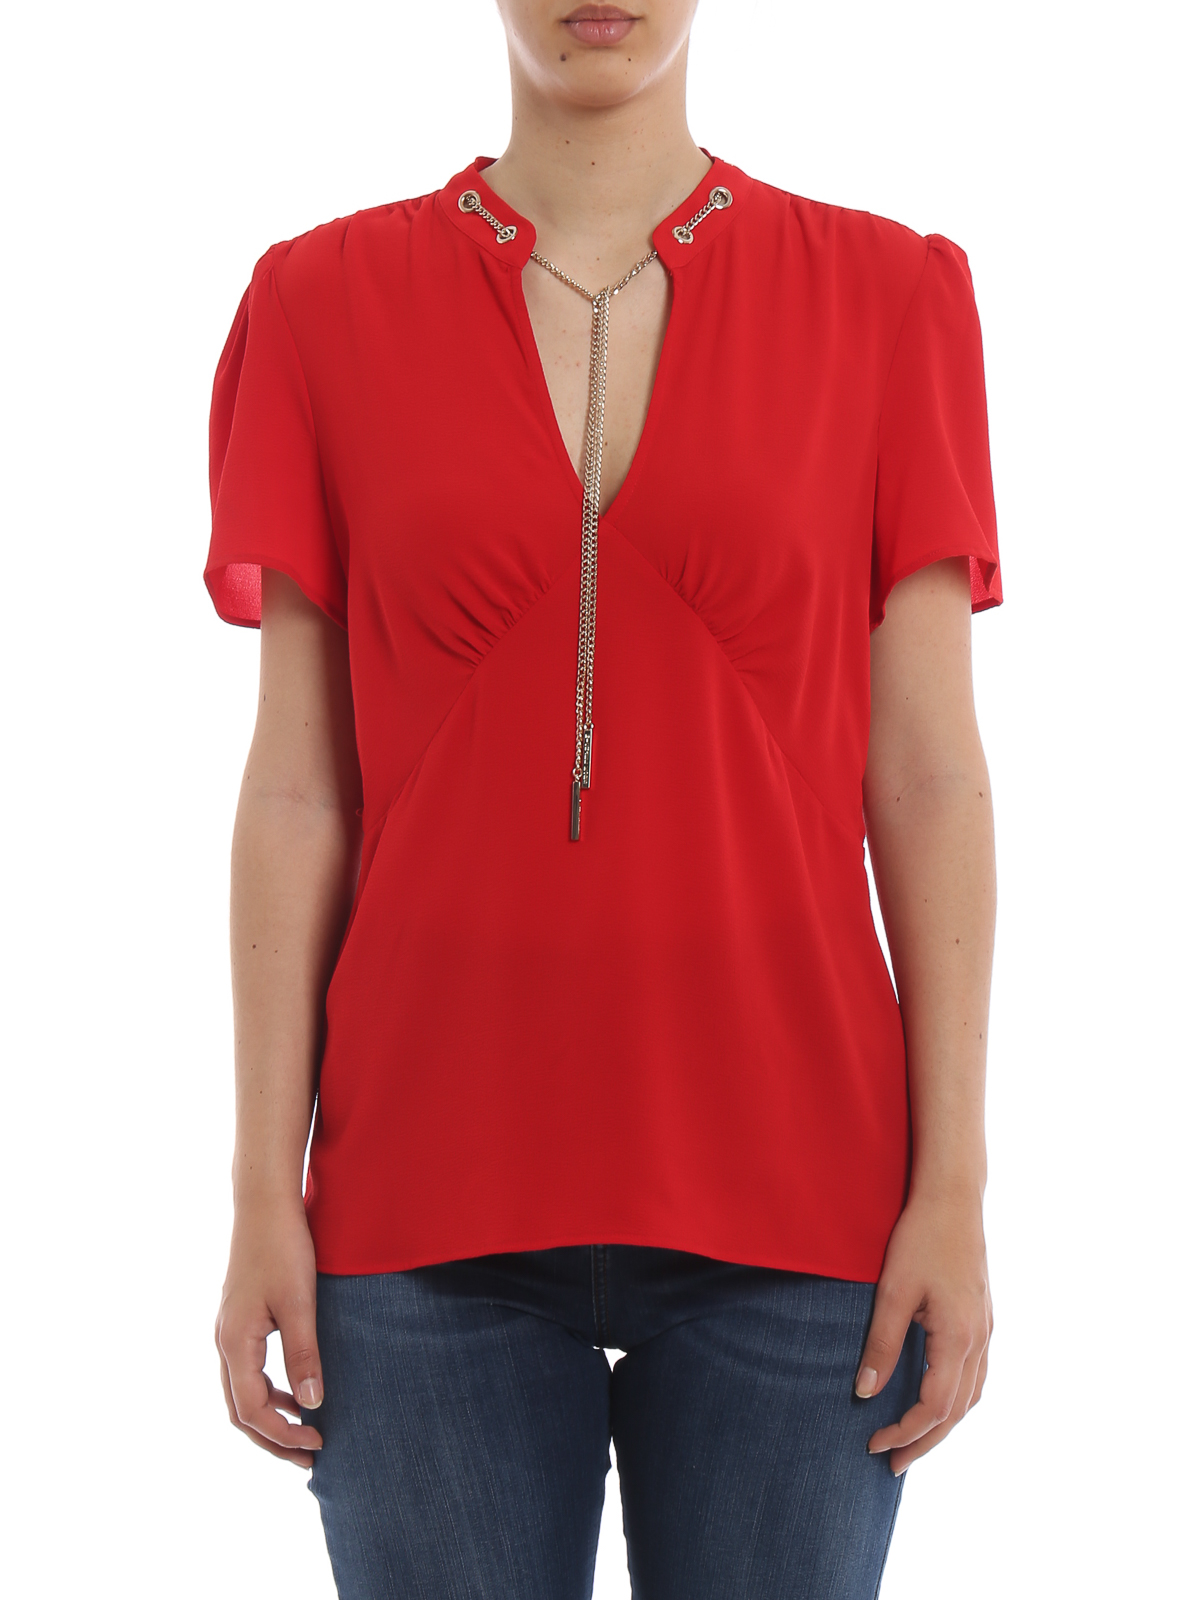 Blouses Michael Kors - Red blouse with gold-tone chain - MS94LTC4YP610